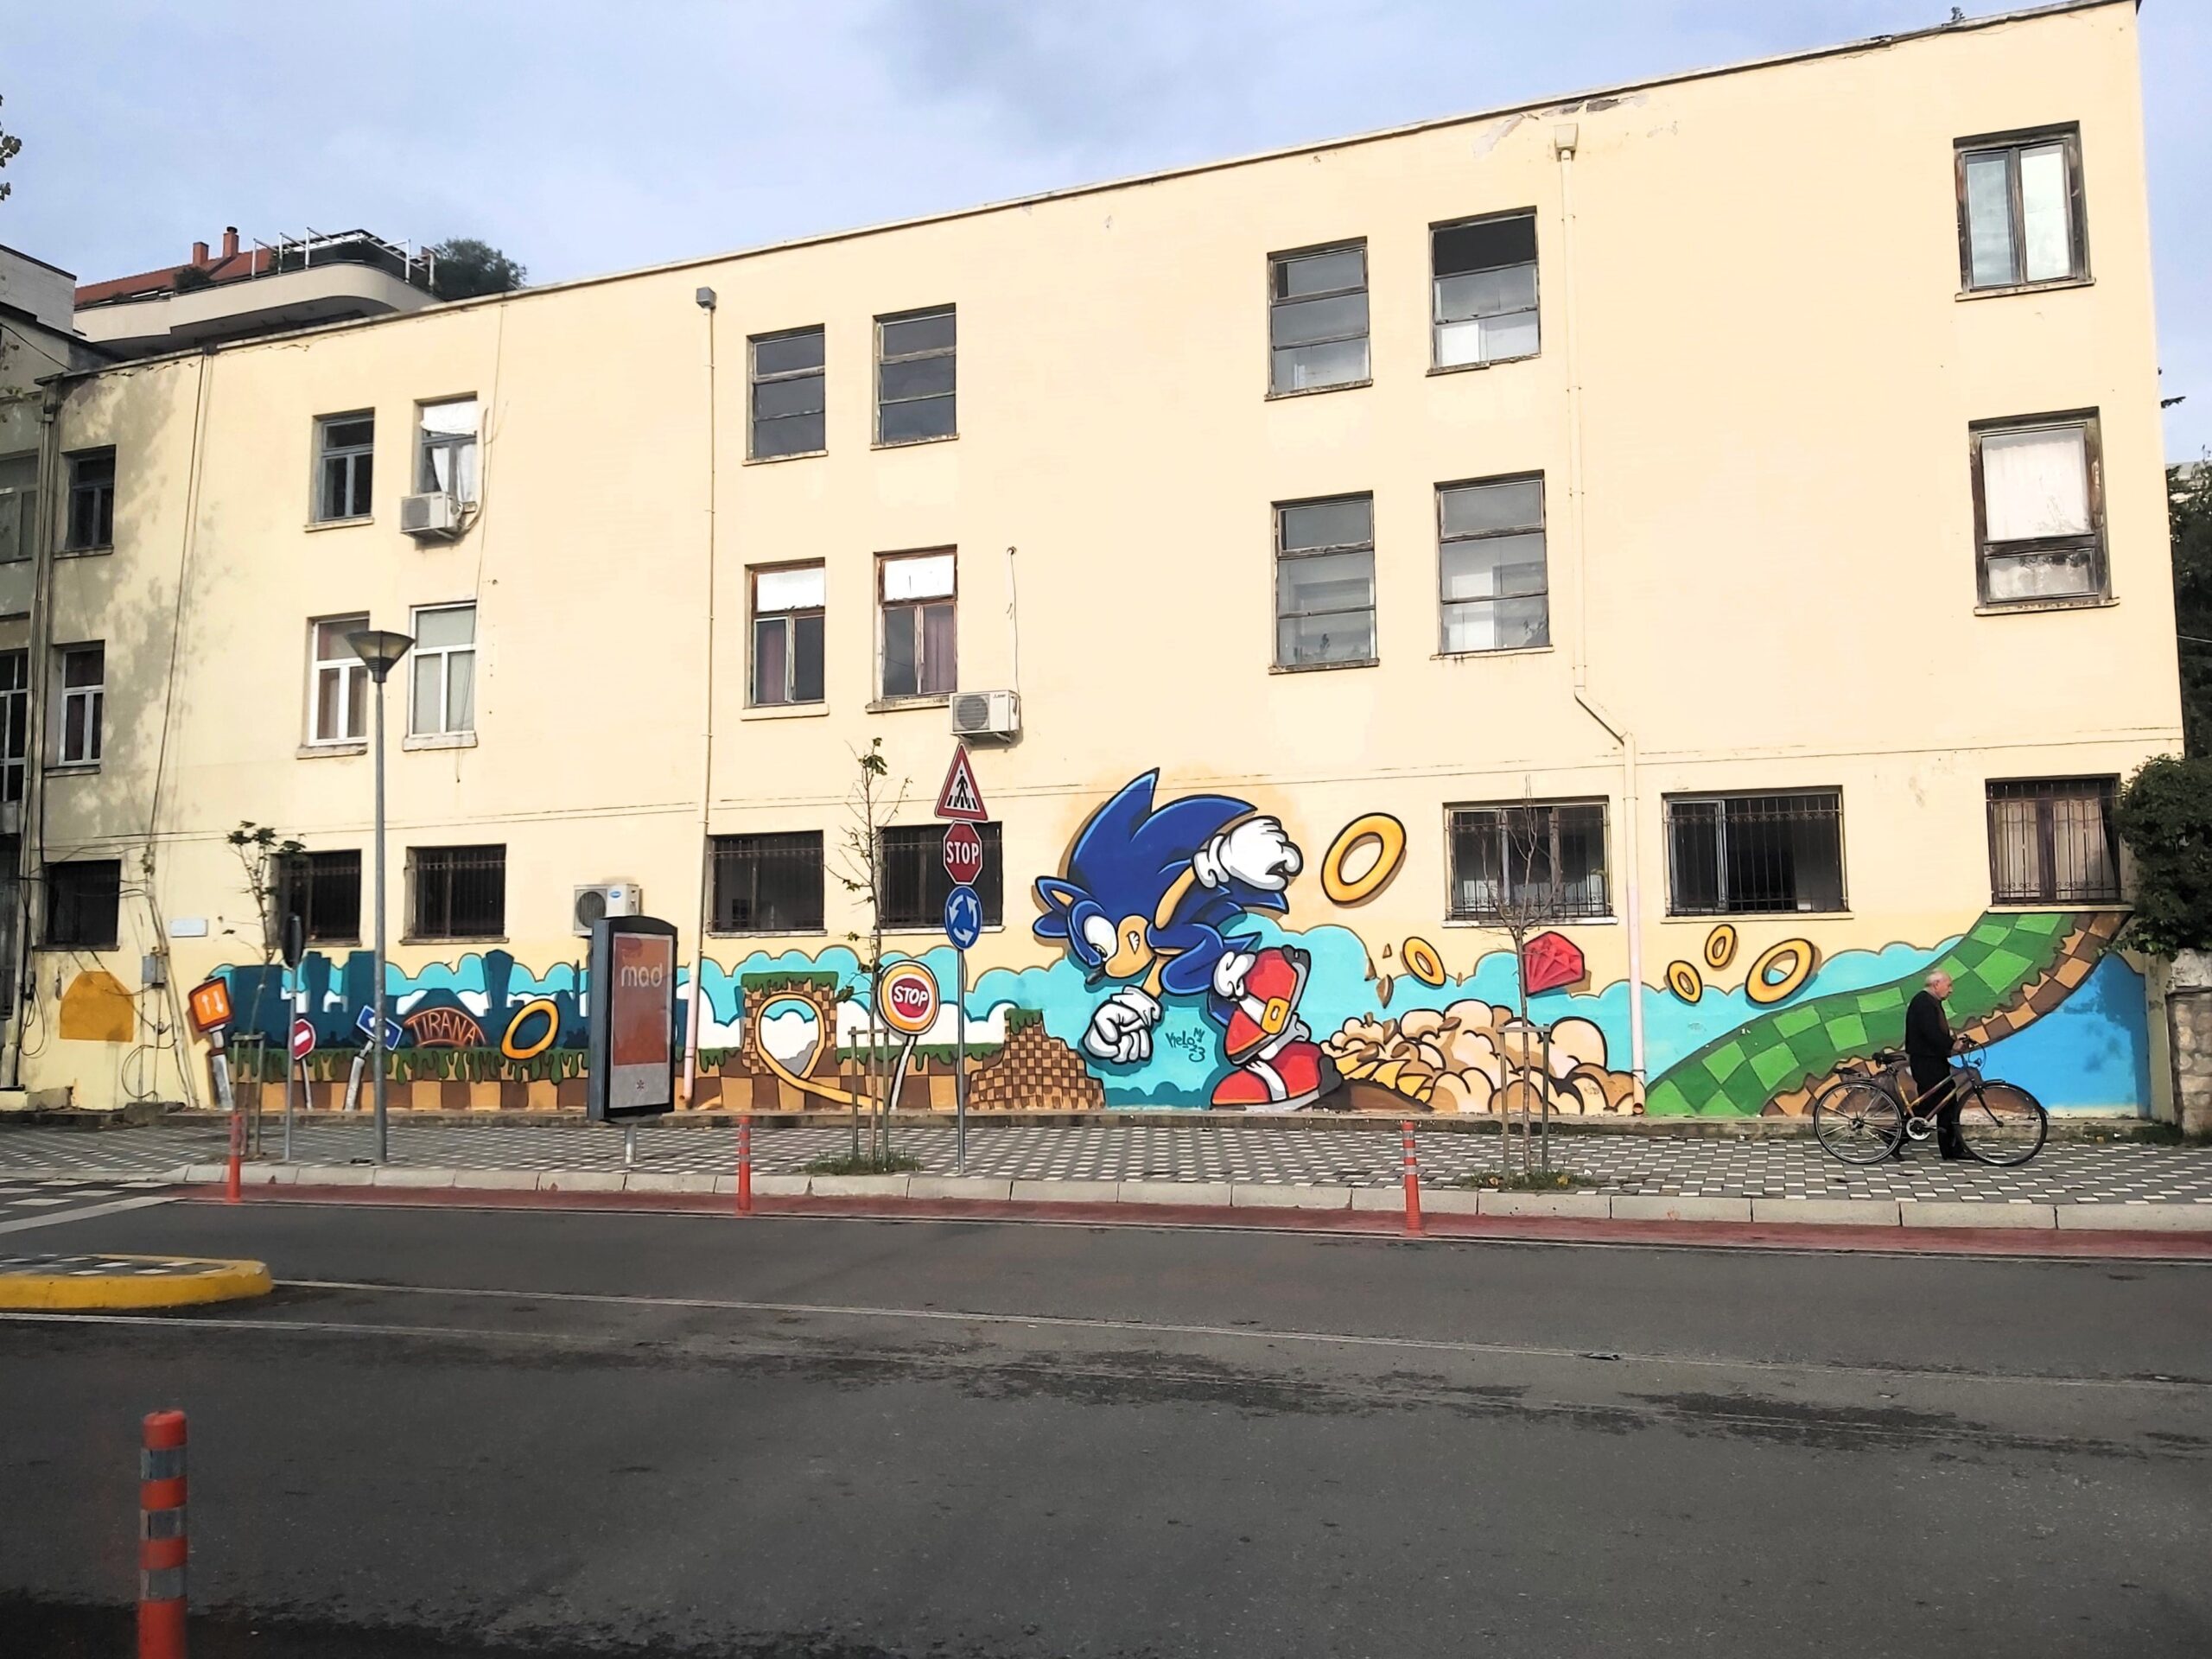 Sonic the Hedgehog mural on a building in Tirana, Albania, with a man and his bike passing.